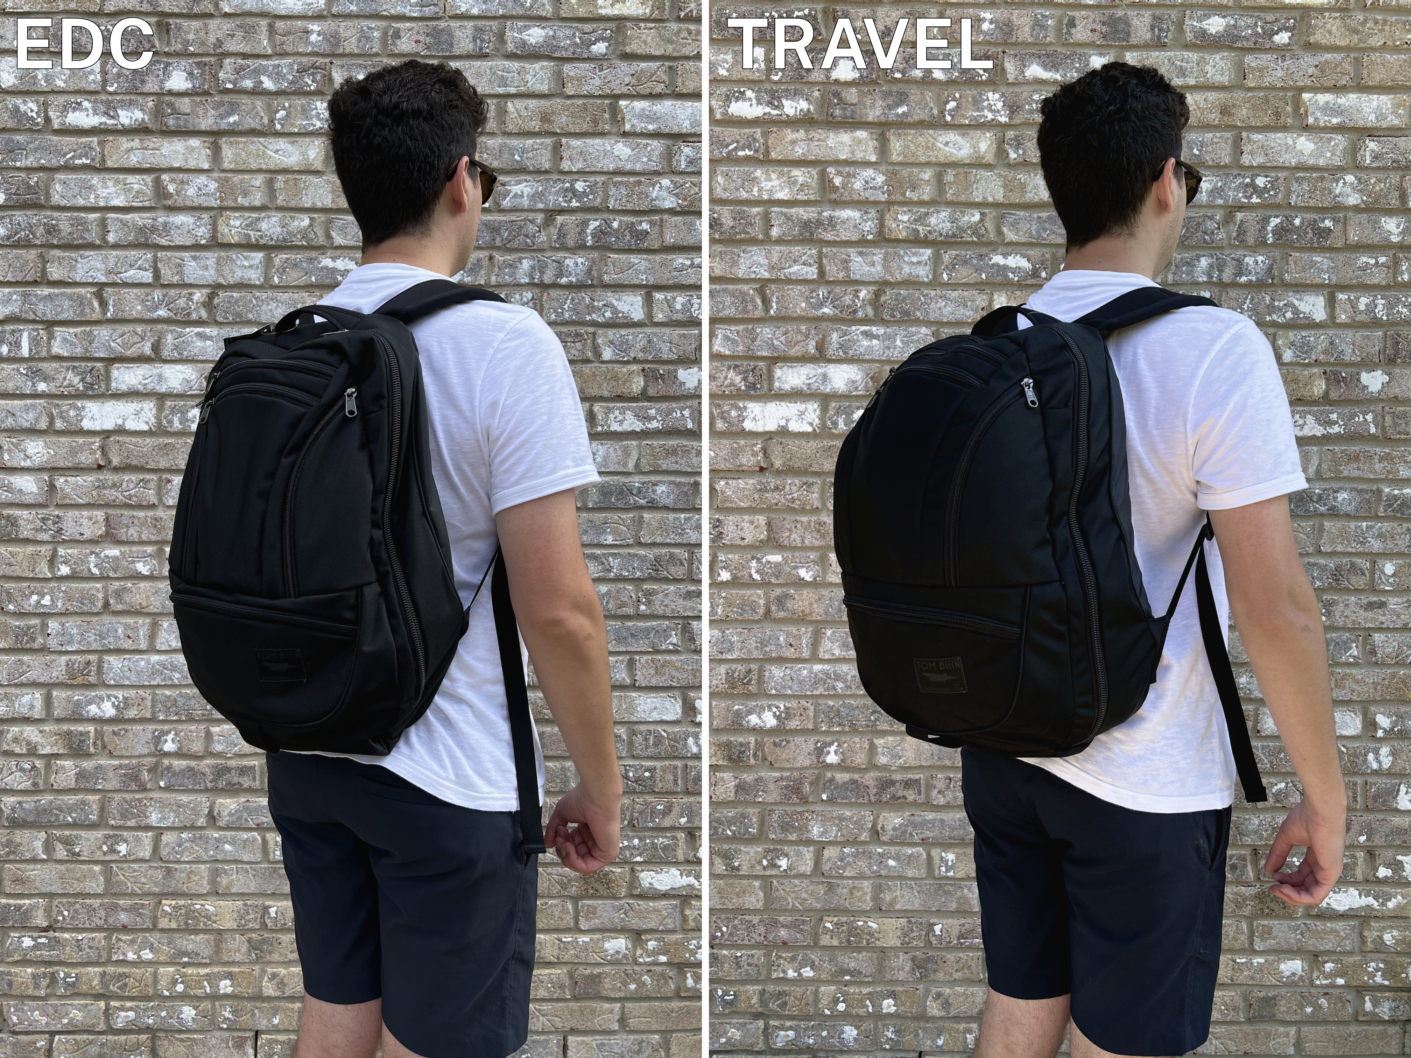 A comparison image between the Tom Bihn Synik holding EDC and travel items